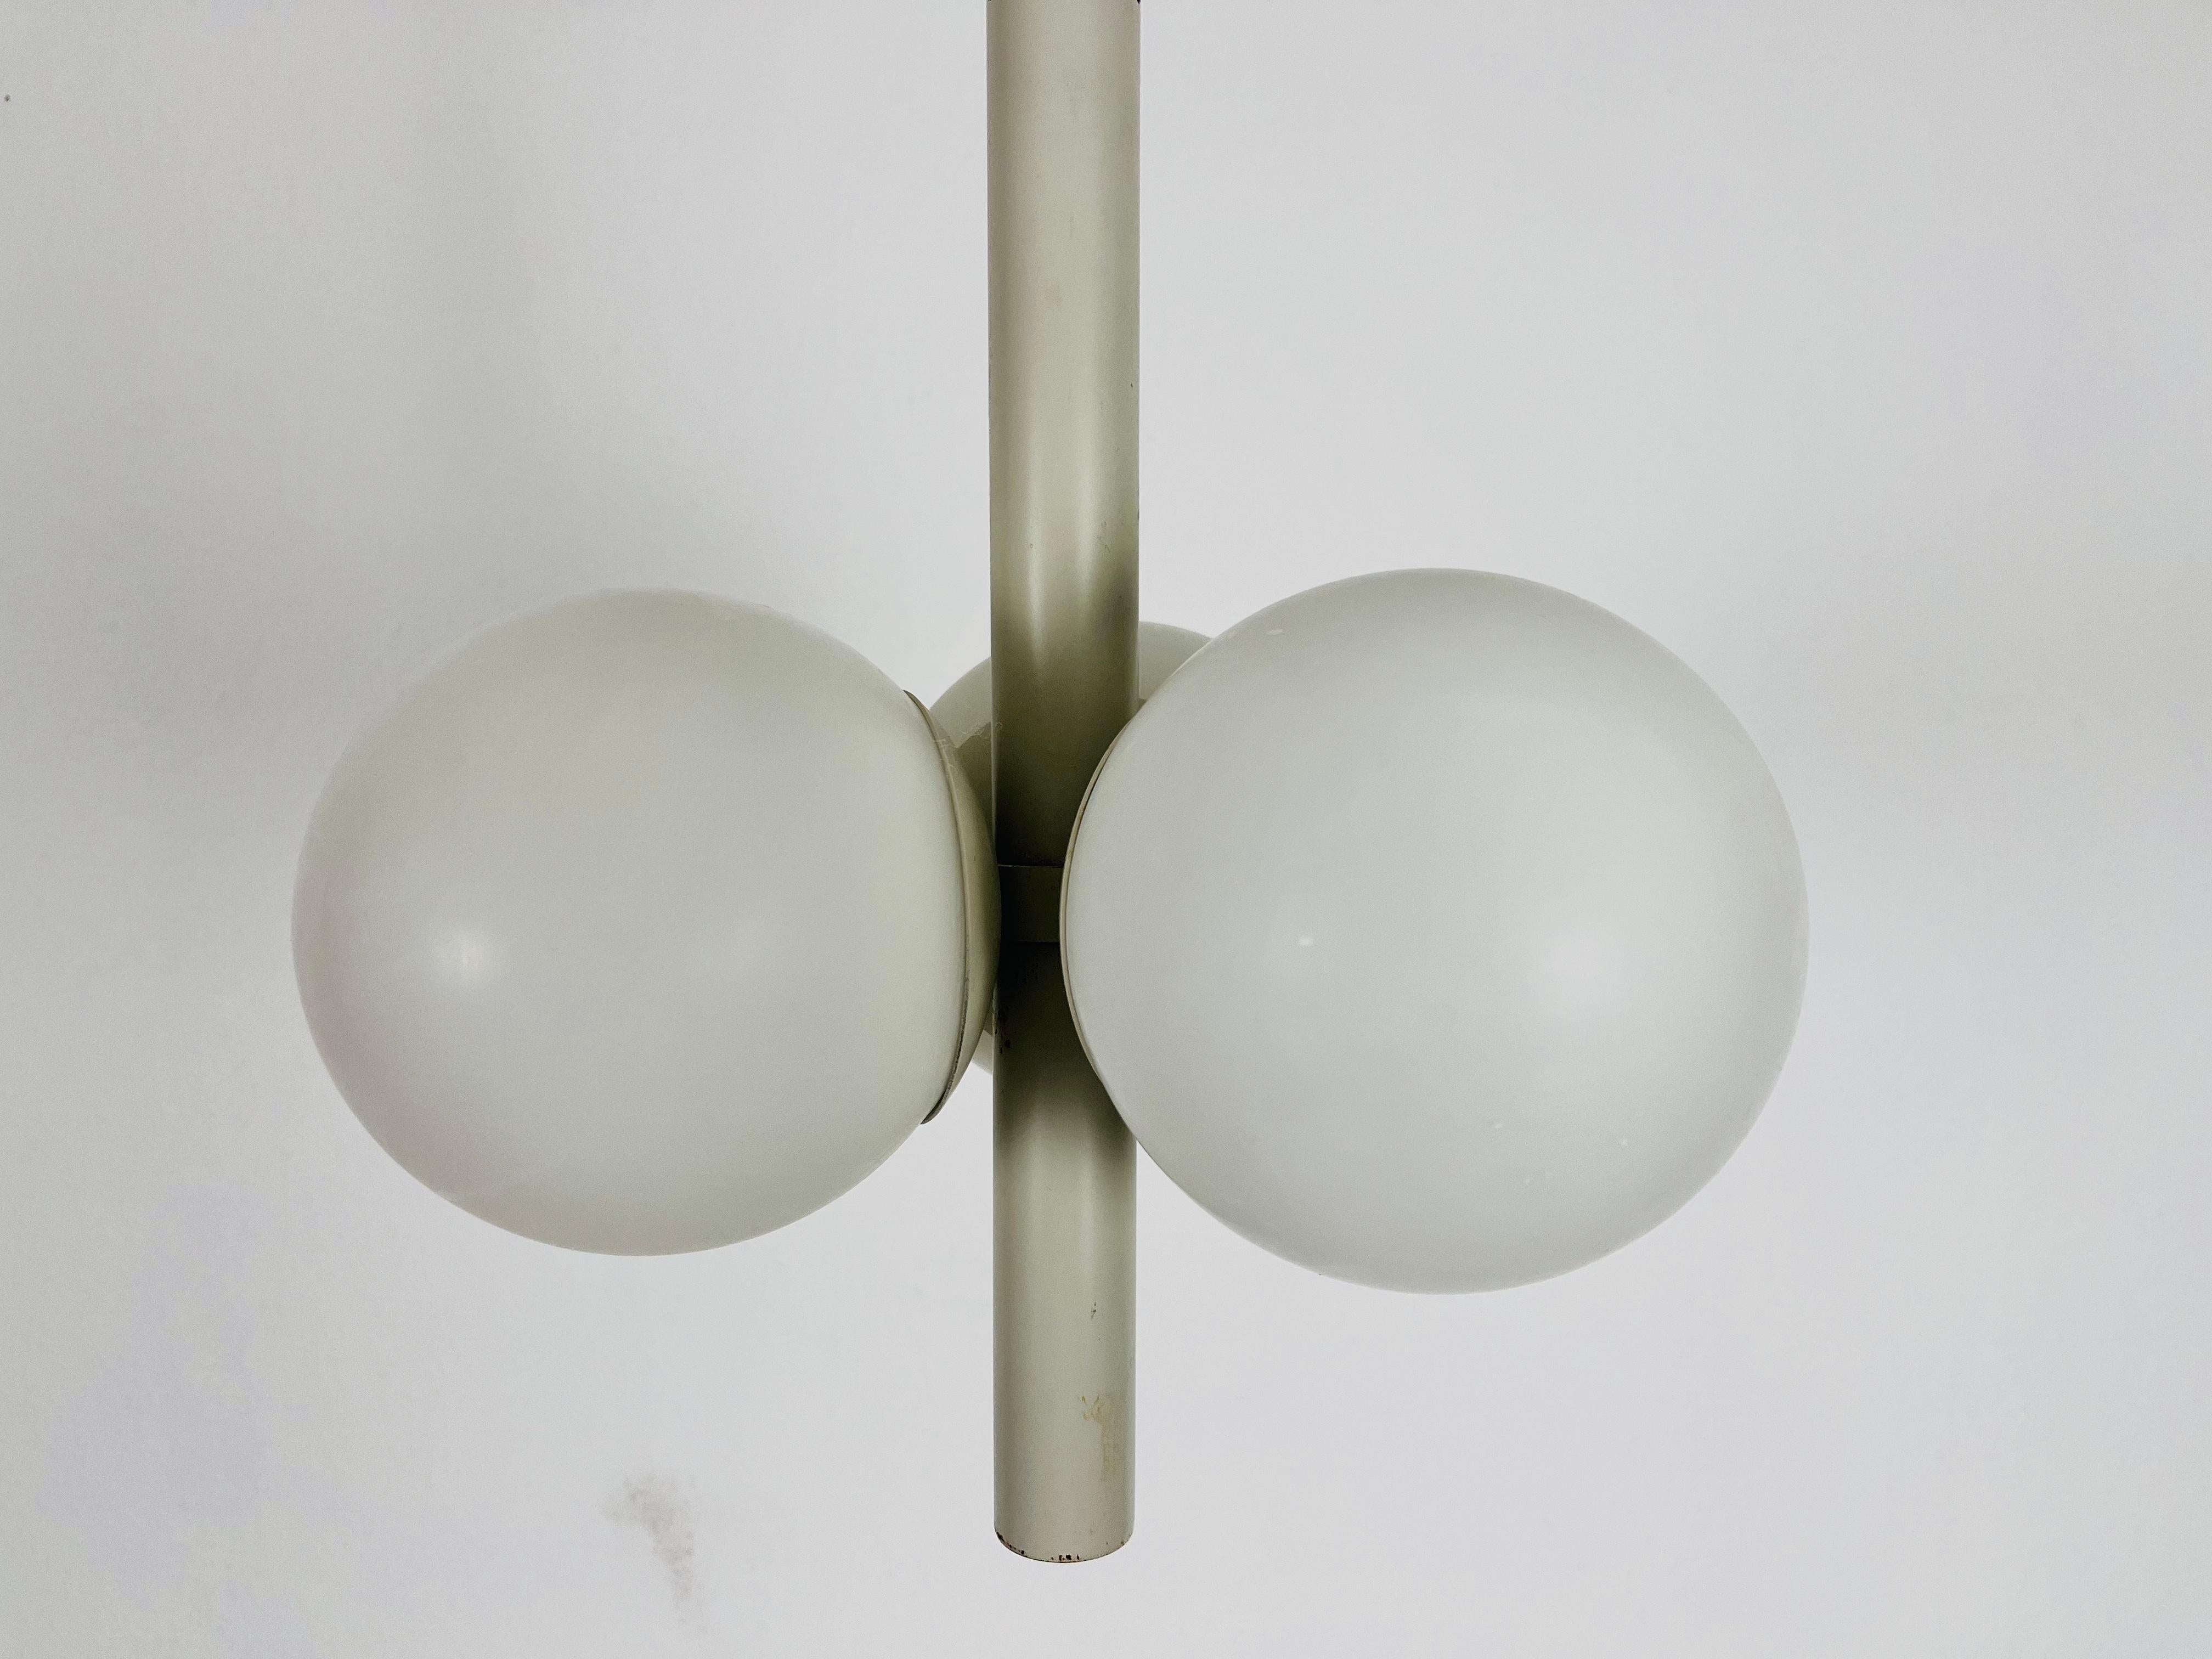 A mid-century Kaiser chandelier made in Germany in the 1960s. It is fascinating with its Space Age design and three opaline glass balls. The body of the light is made of white colored metal.

The light requires three E14 light bulbs. Works with